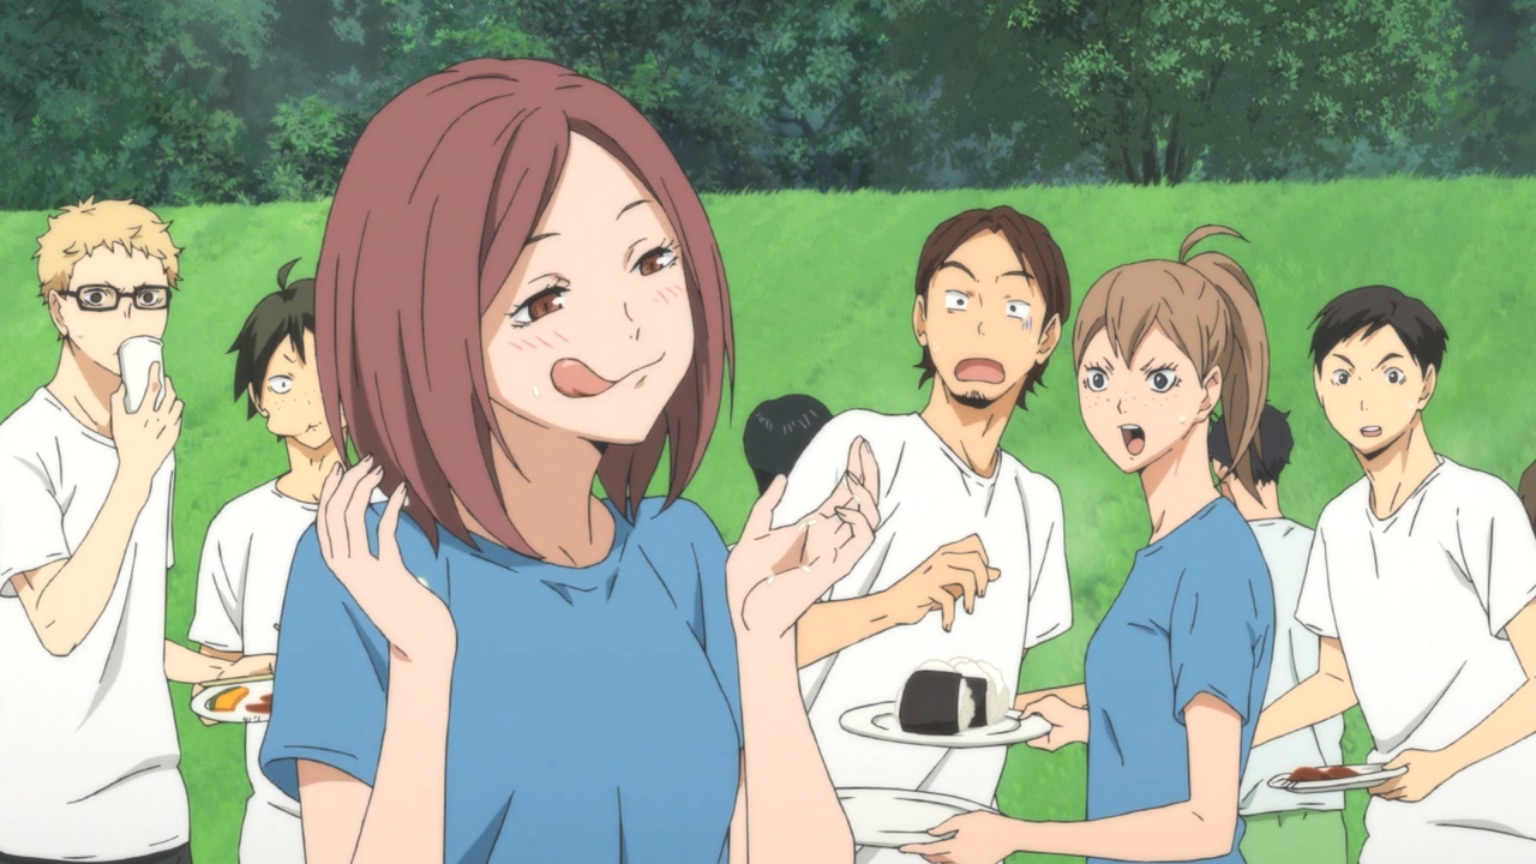 Haikyuu!! Second Season Episode 11 Discussion - Forums 